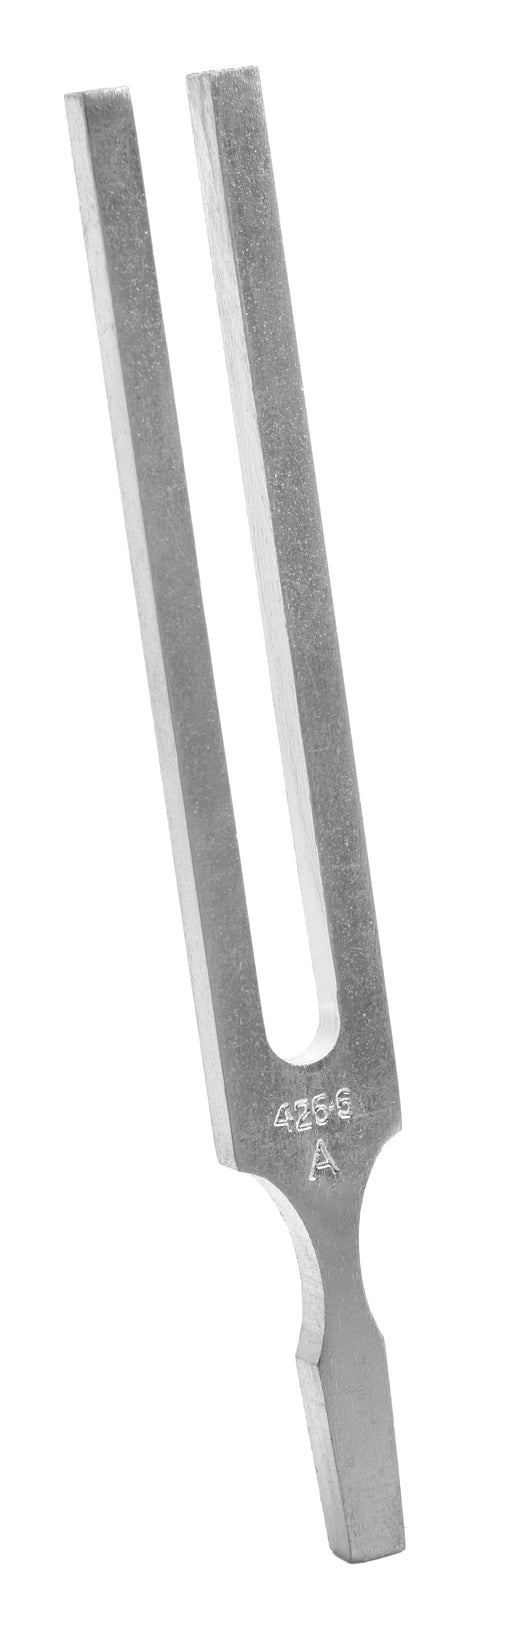 Tuning Fork, 426Hz - A Note - Plain Shanks, Made of Premium Quality Aluminum - Designed for Physics Experimentation - Eisco Labs